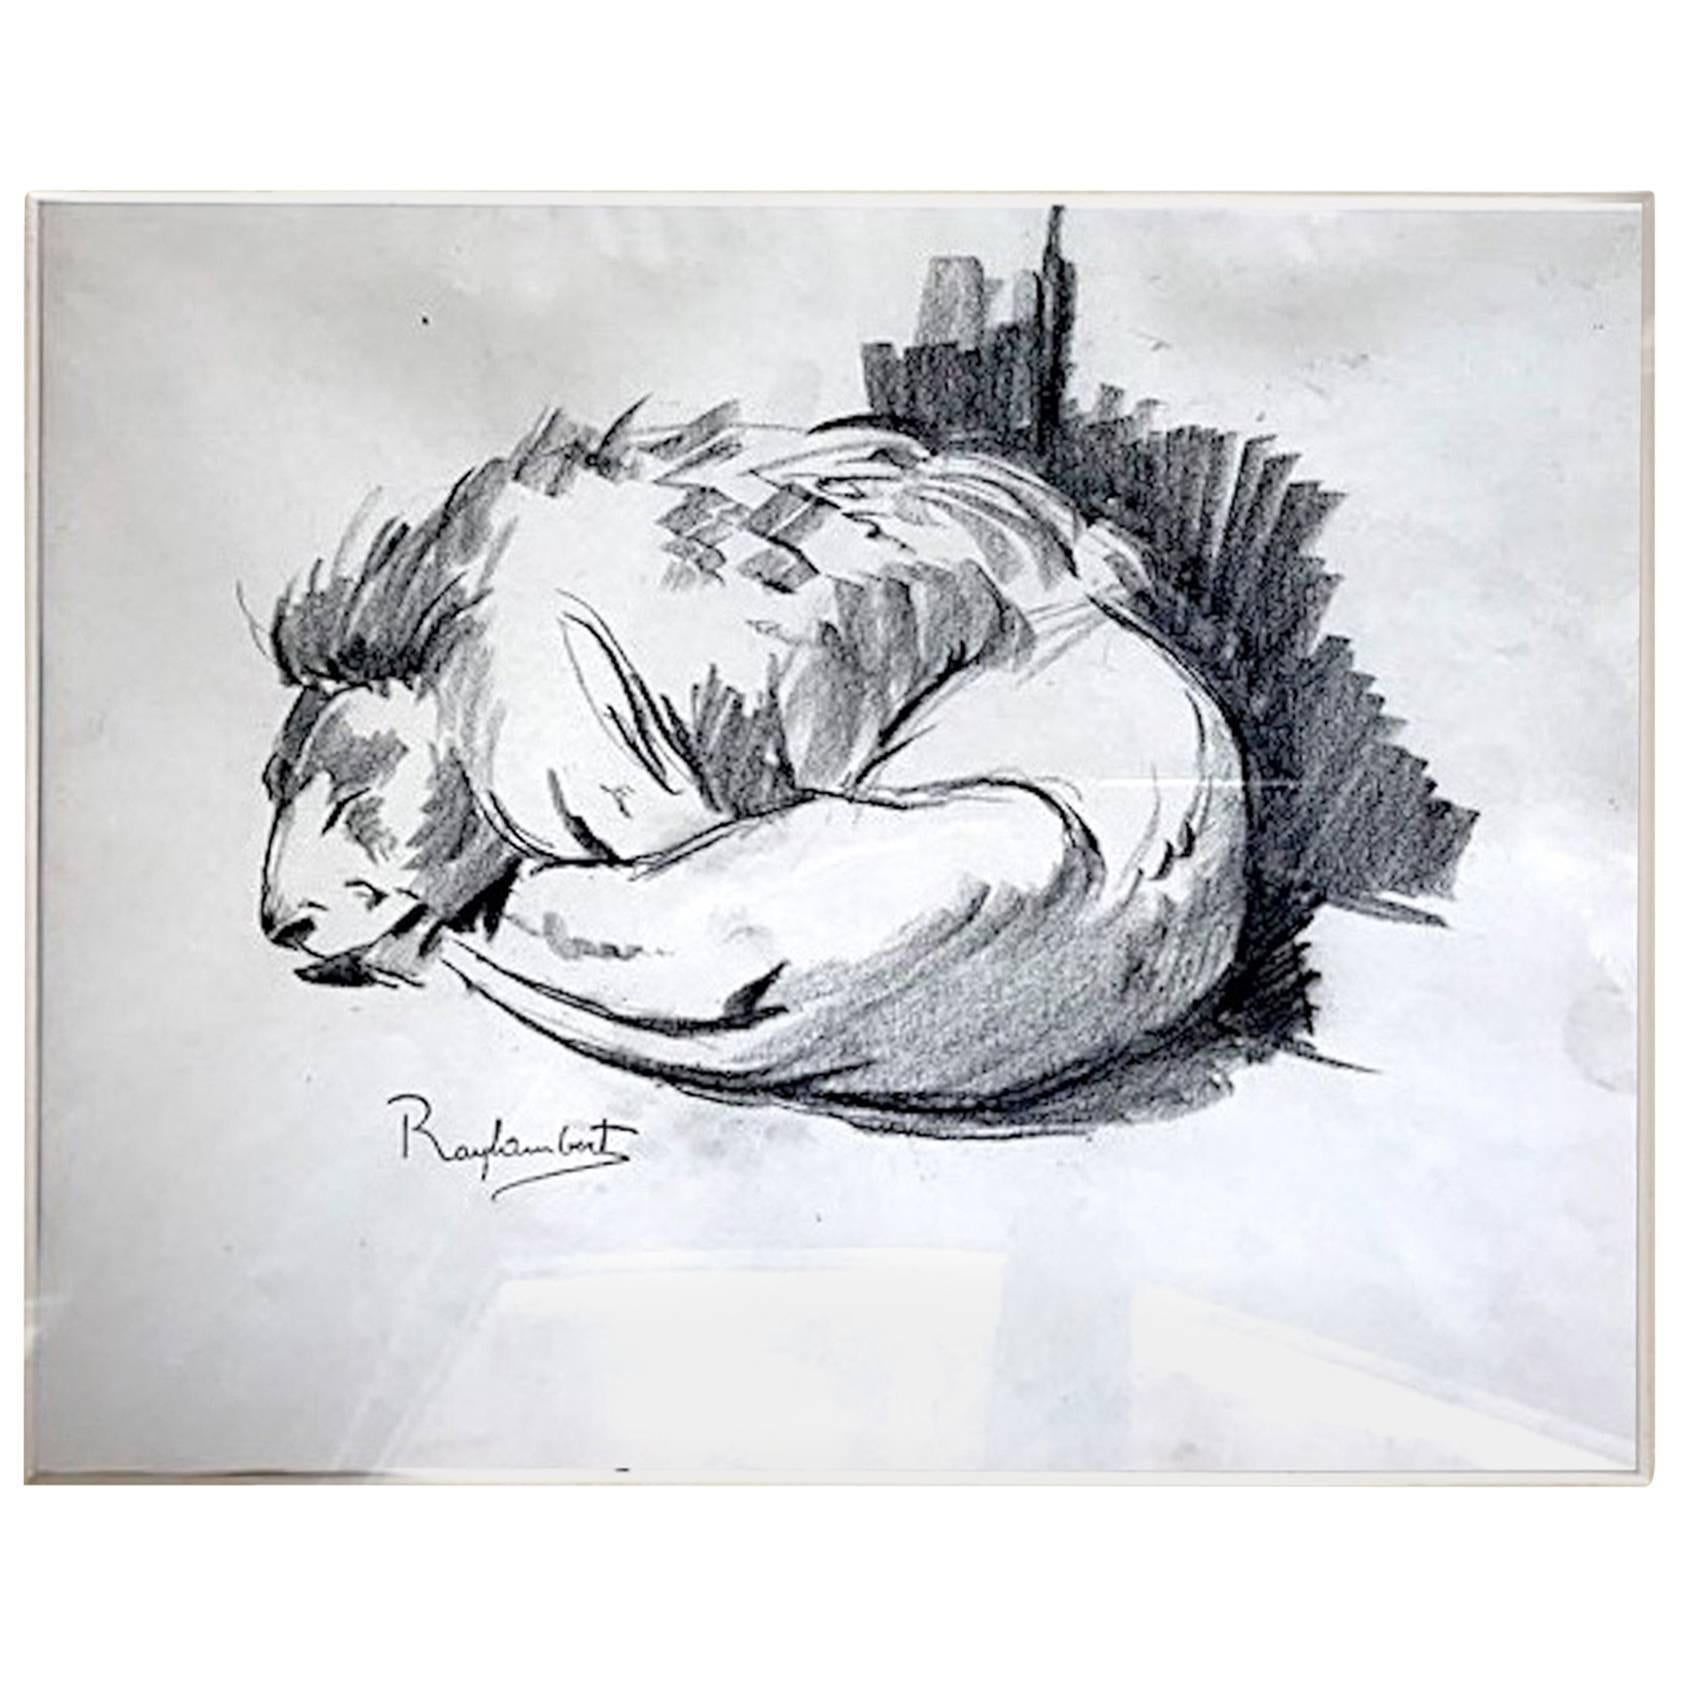 Paul Jouve Period  4  Original French Drawing Most of Lion by Raylambert, 1940